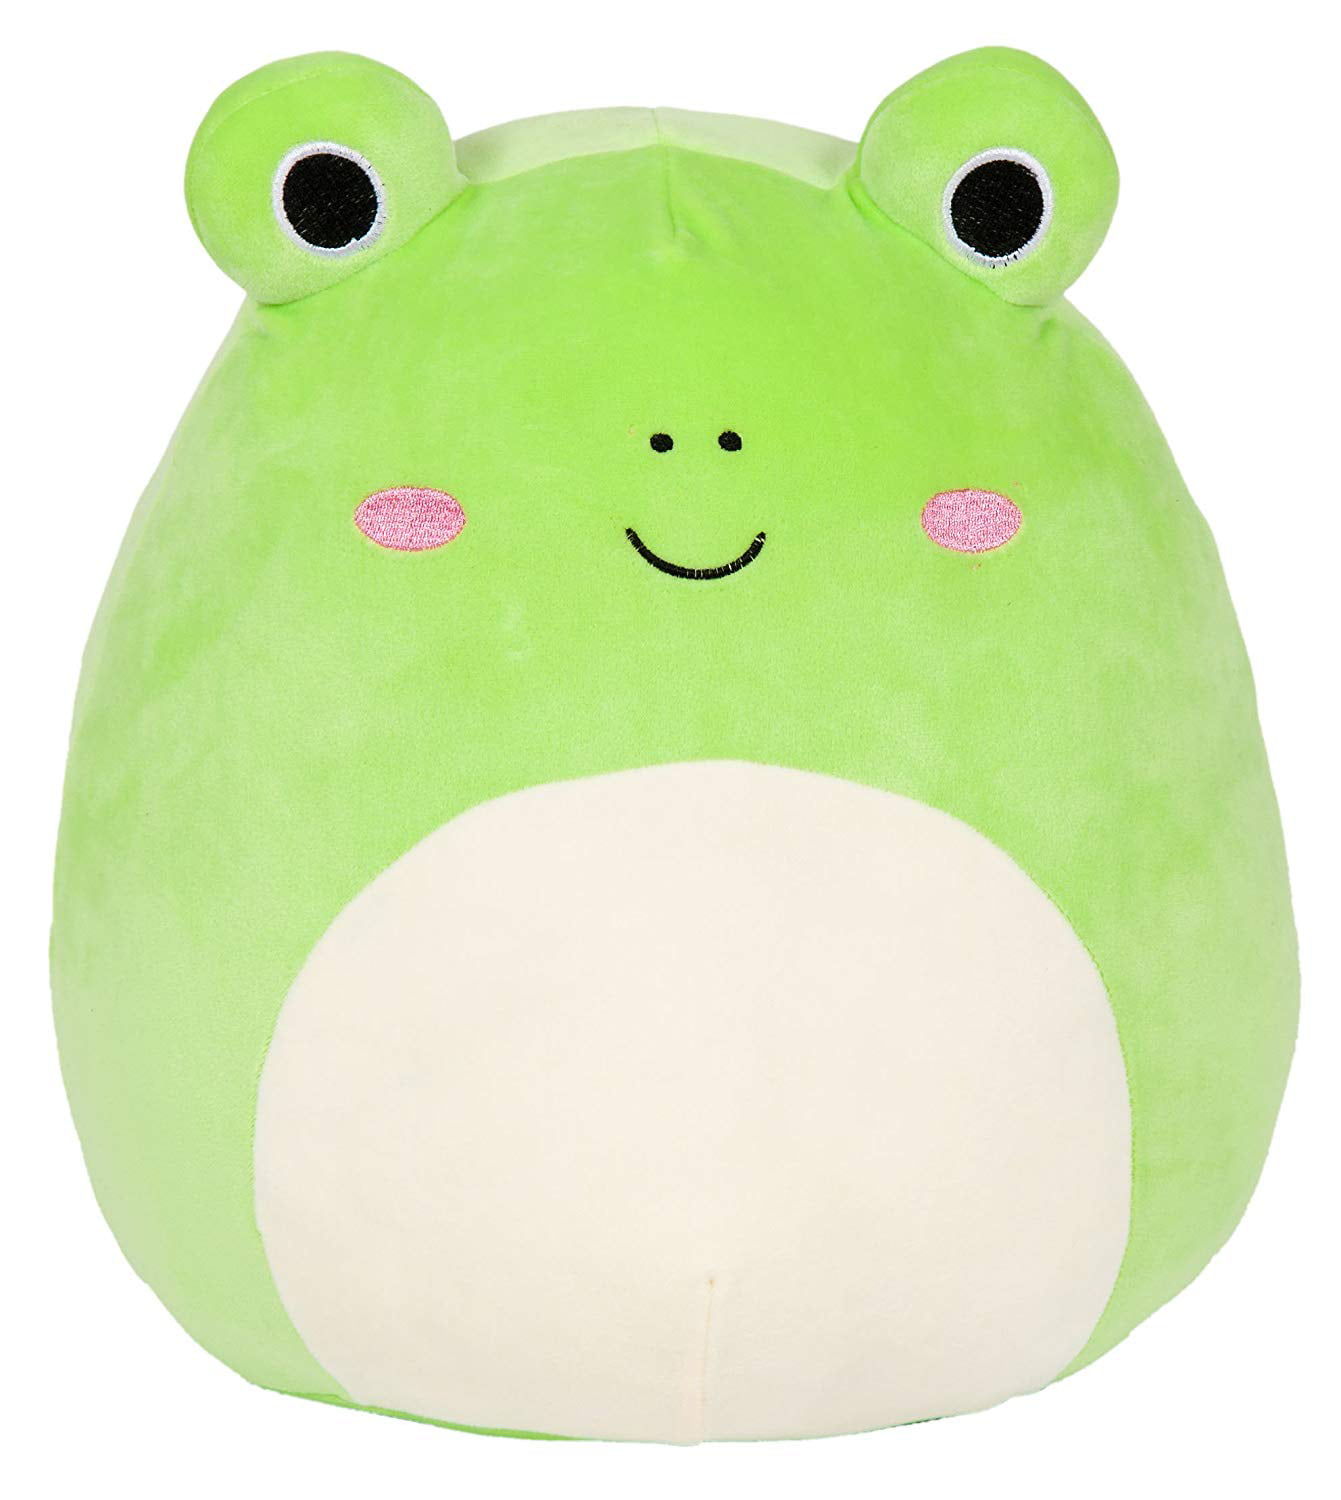 Squishmallow 5” Flip a Mallow Wendy The Frog & Hank the Hippo Rare NWT 